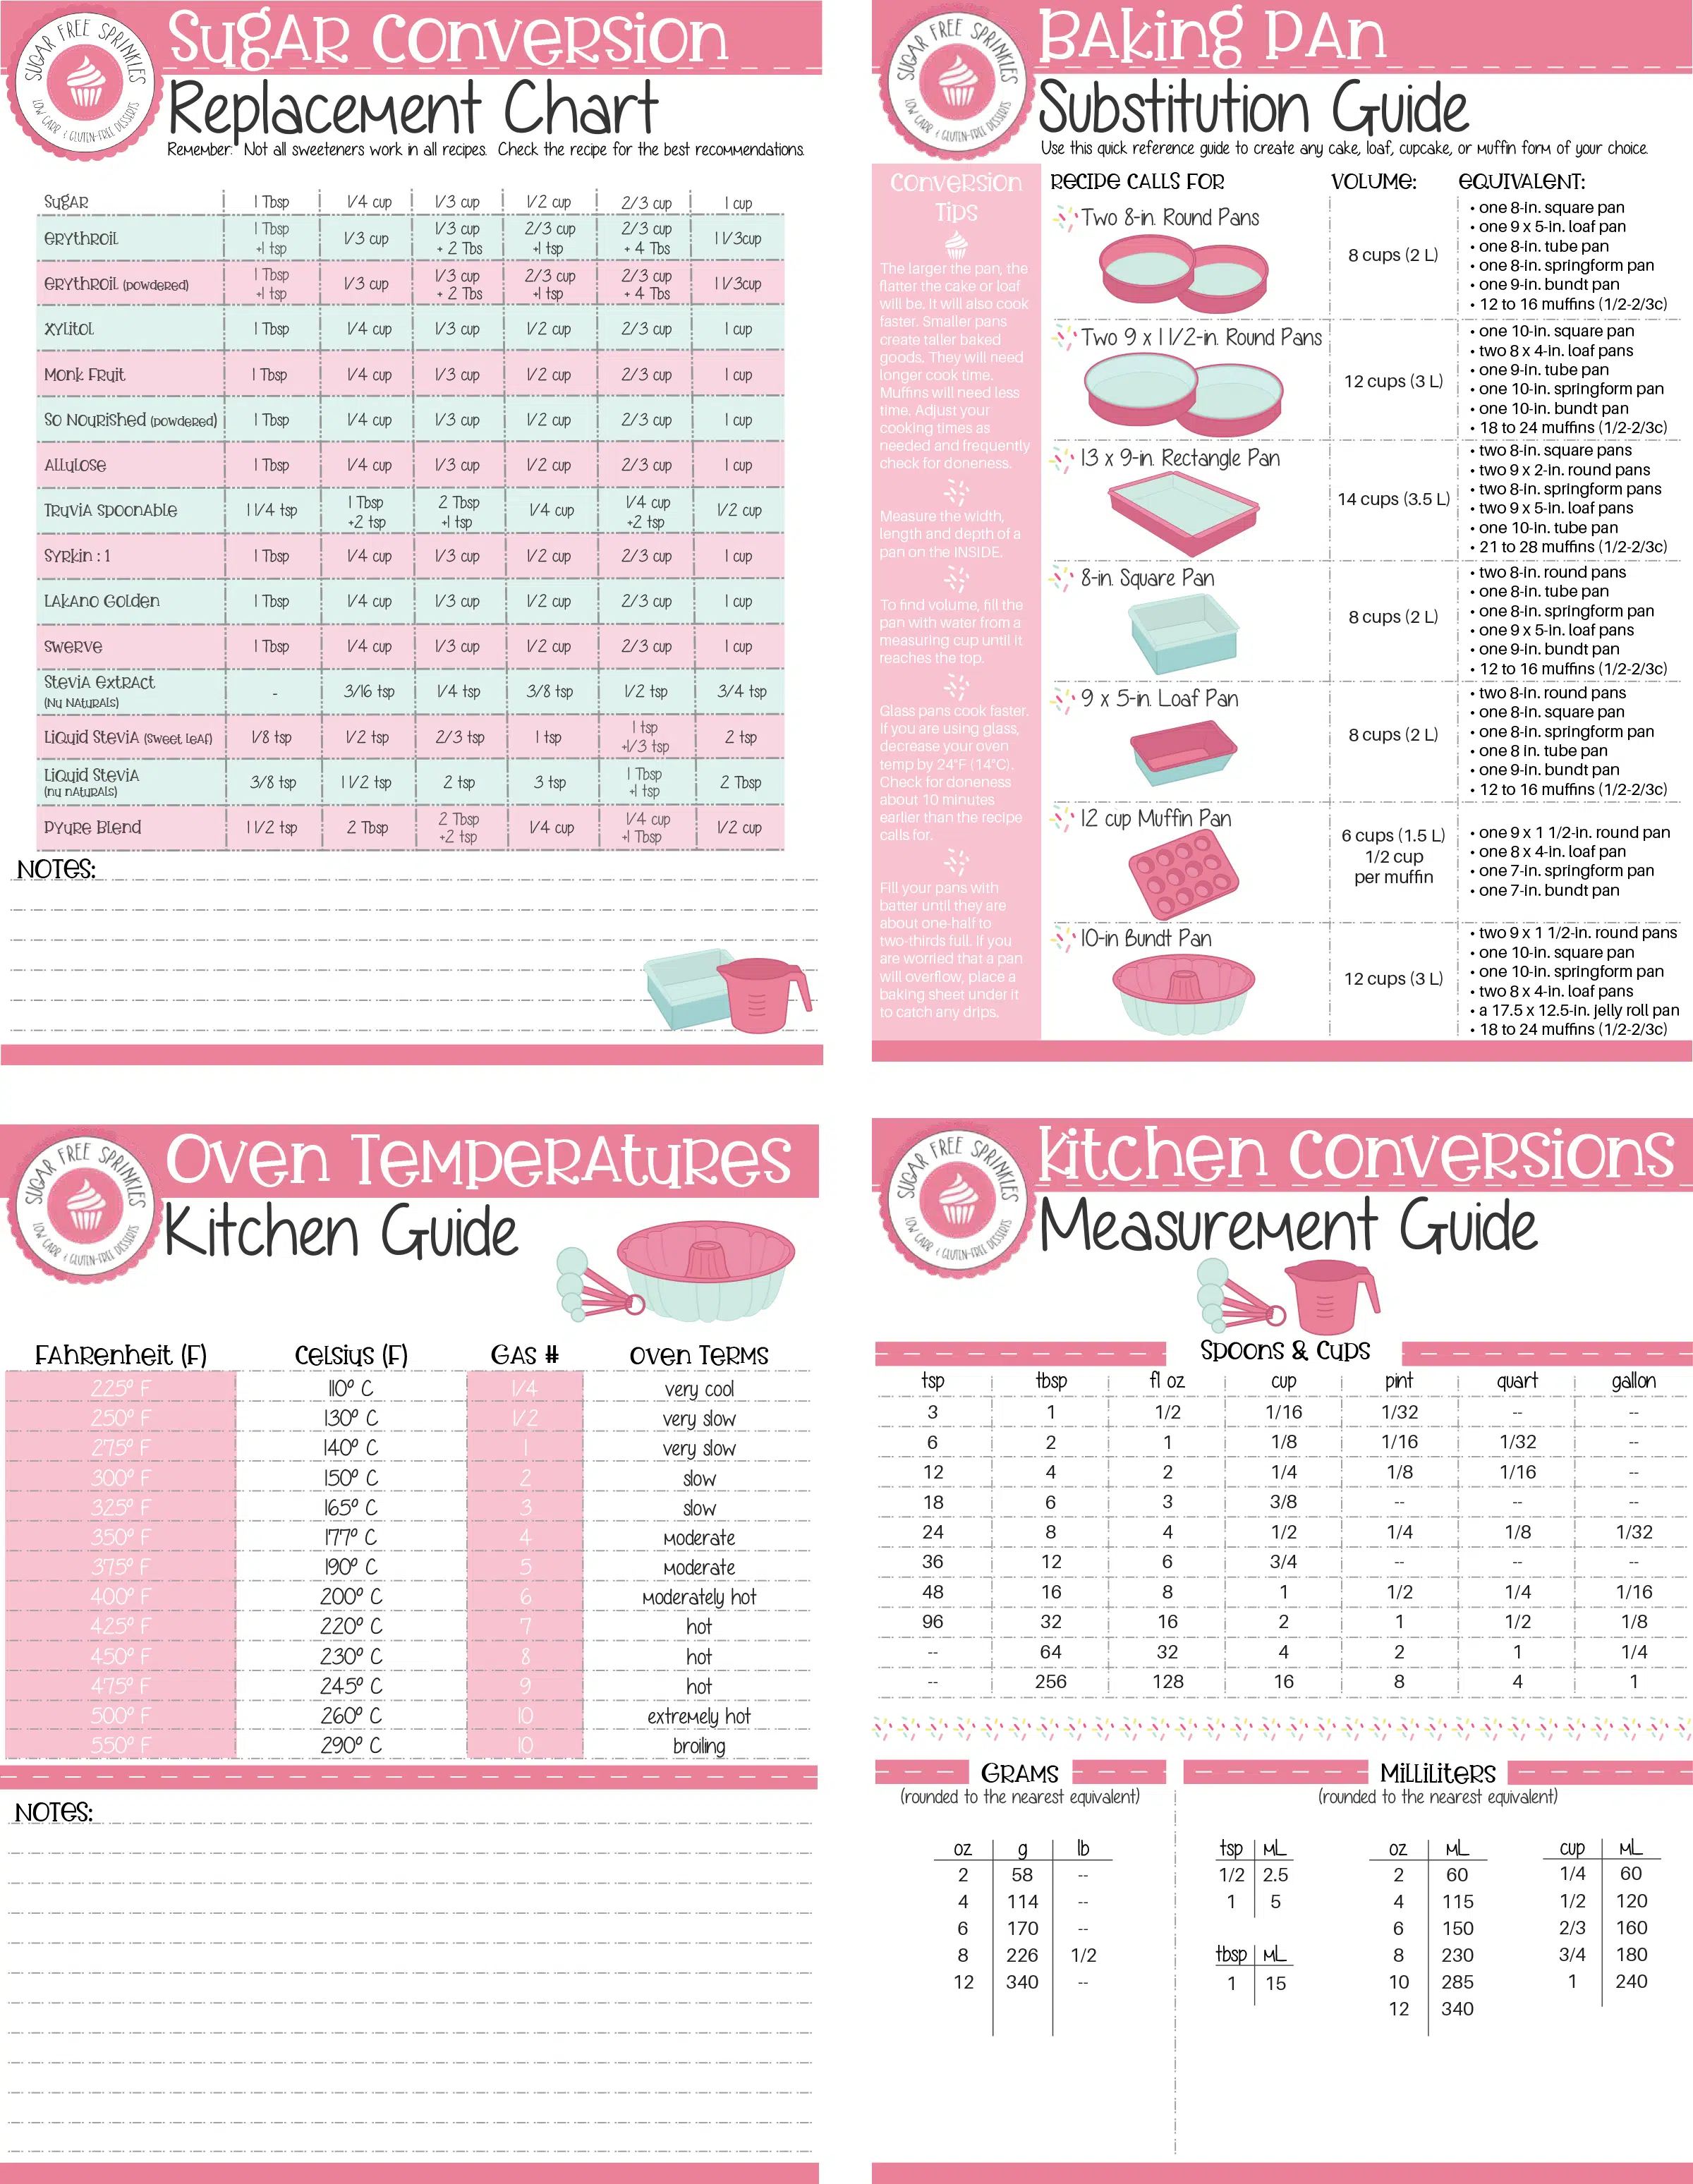 Thumbnail-sized images of baking and conversion info-sheets.